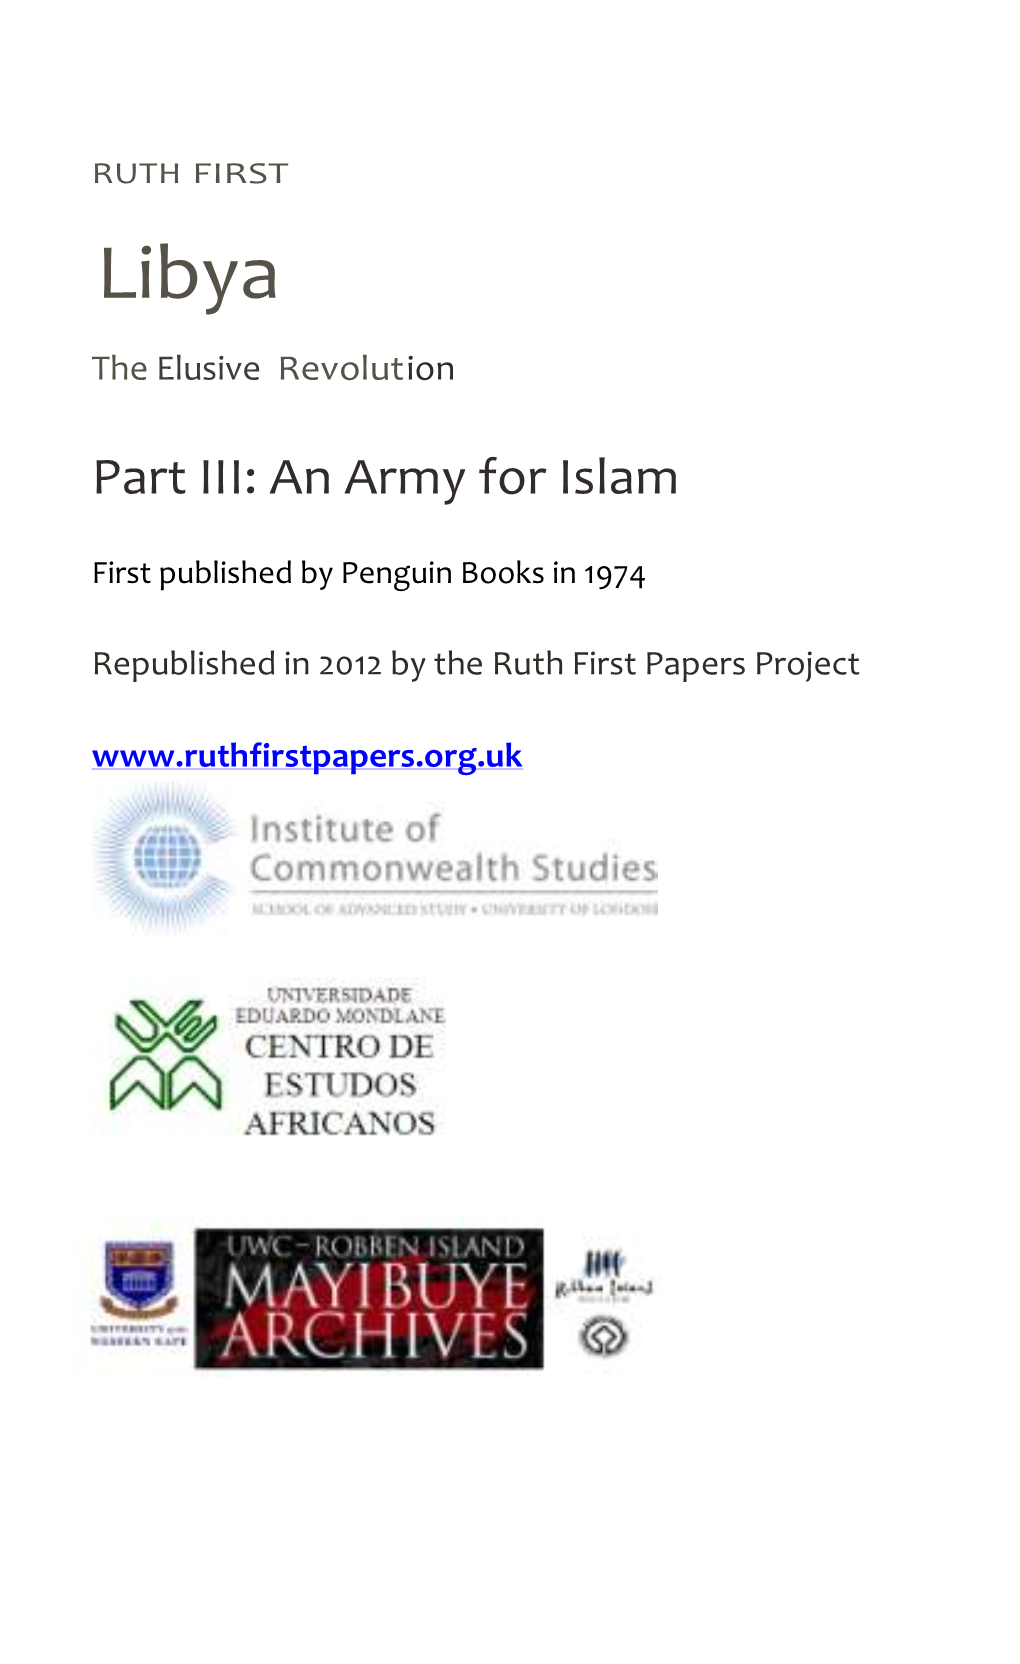 Part III: an Army for Islam